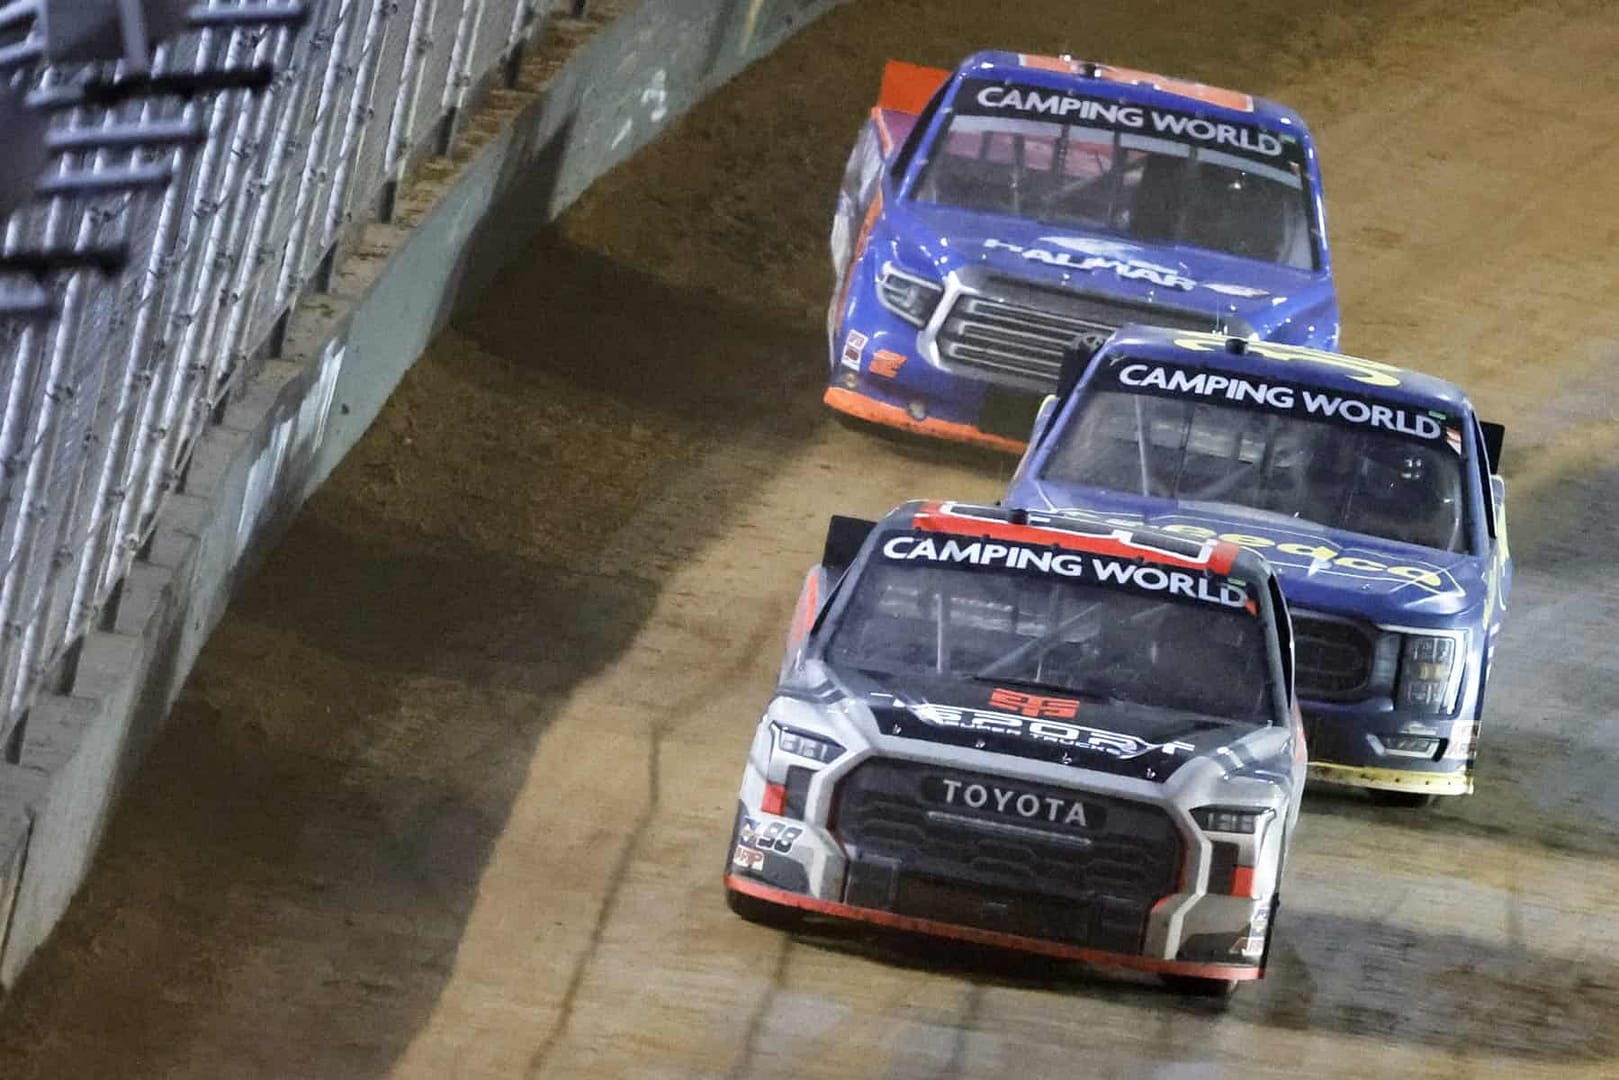 NASCAR's Craftsman Truck Series returns for the Weather Guard Truck Race on Dirt this Saturday. Here are the top NASCAR bets for Bristol...